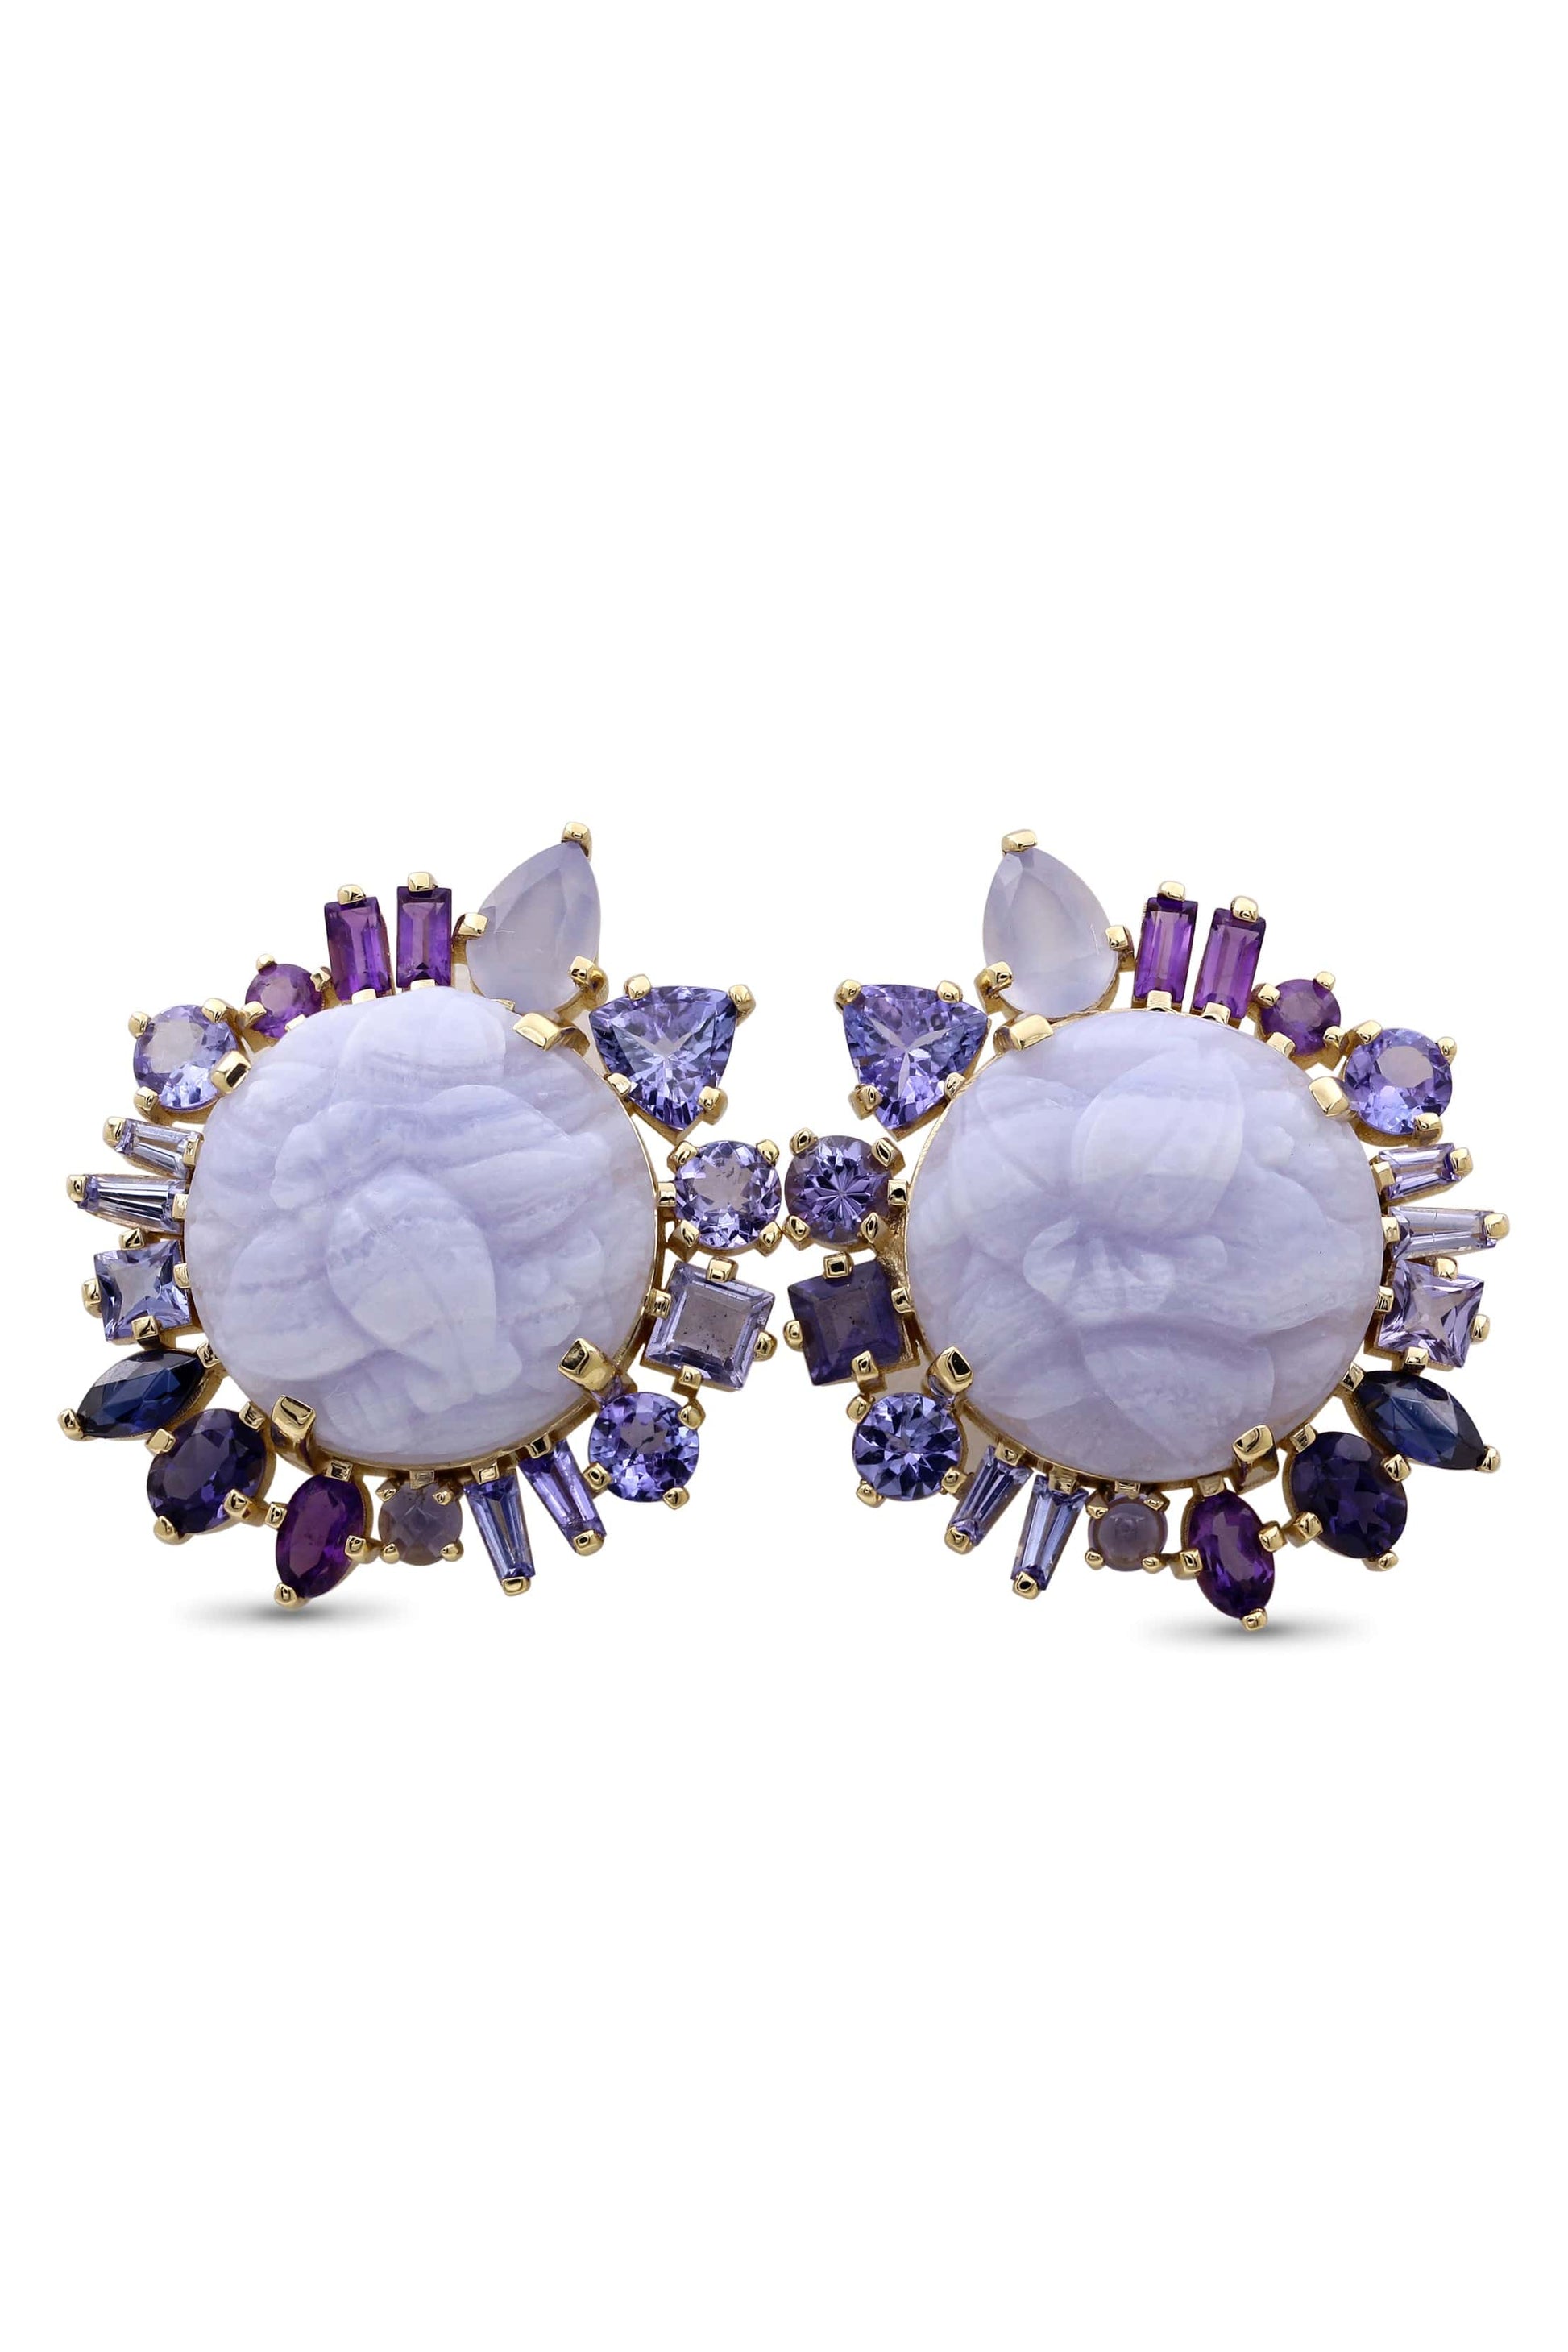 STEPHEN DWECK-Carved Blue Lace Agate Earrings-YELLOW GOLD